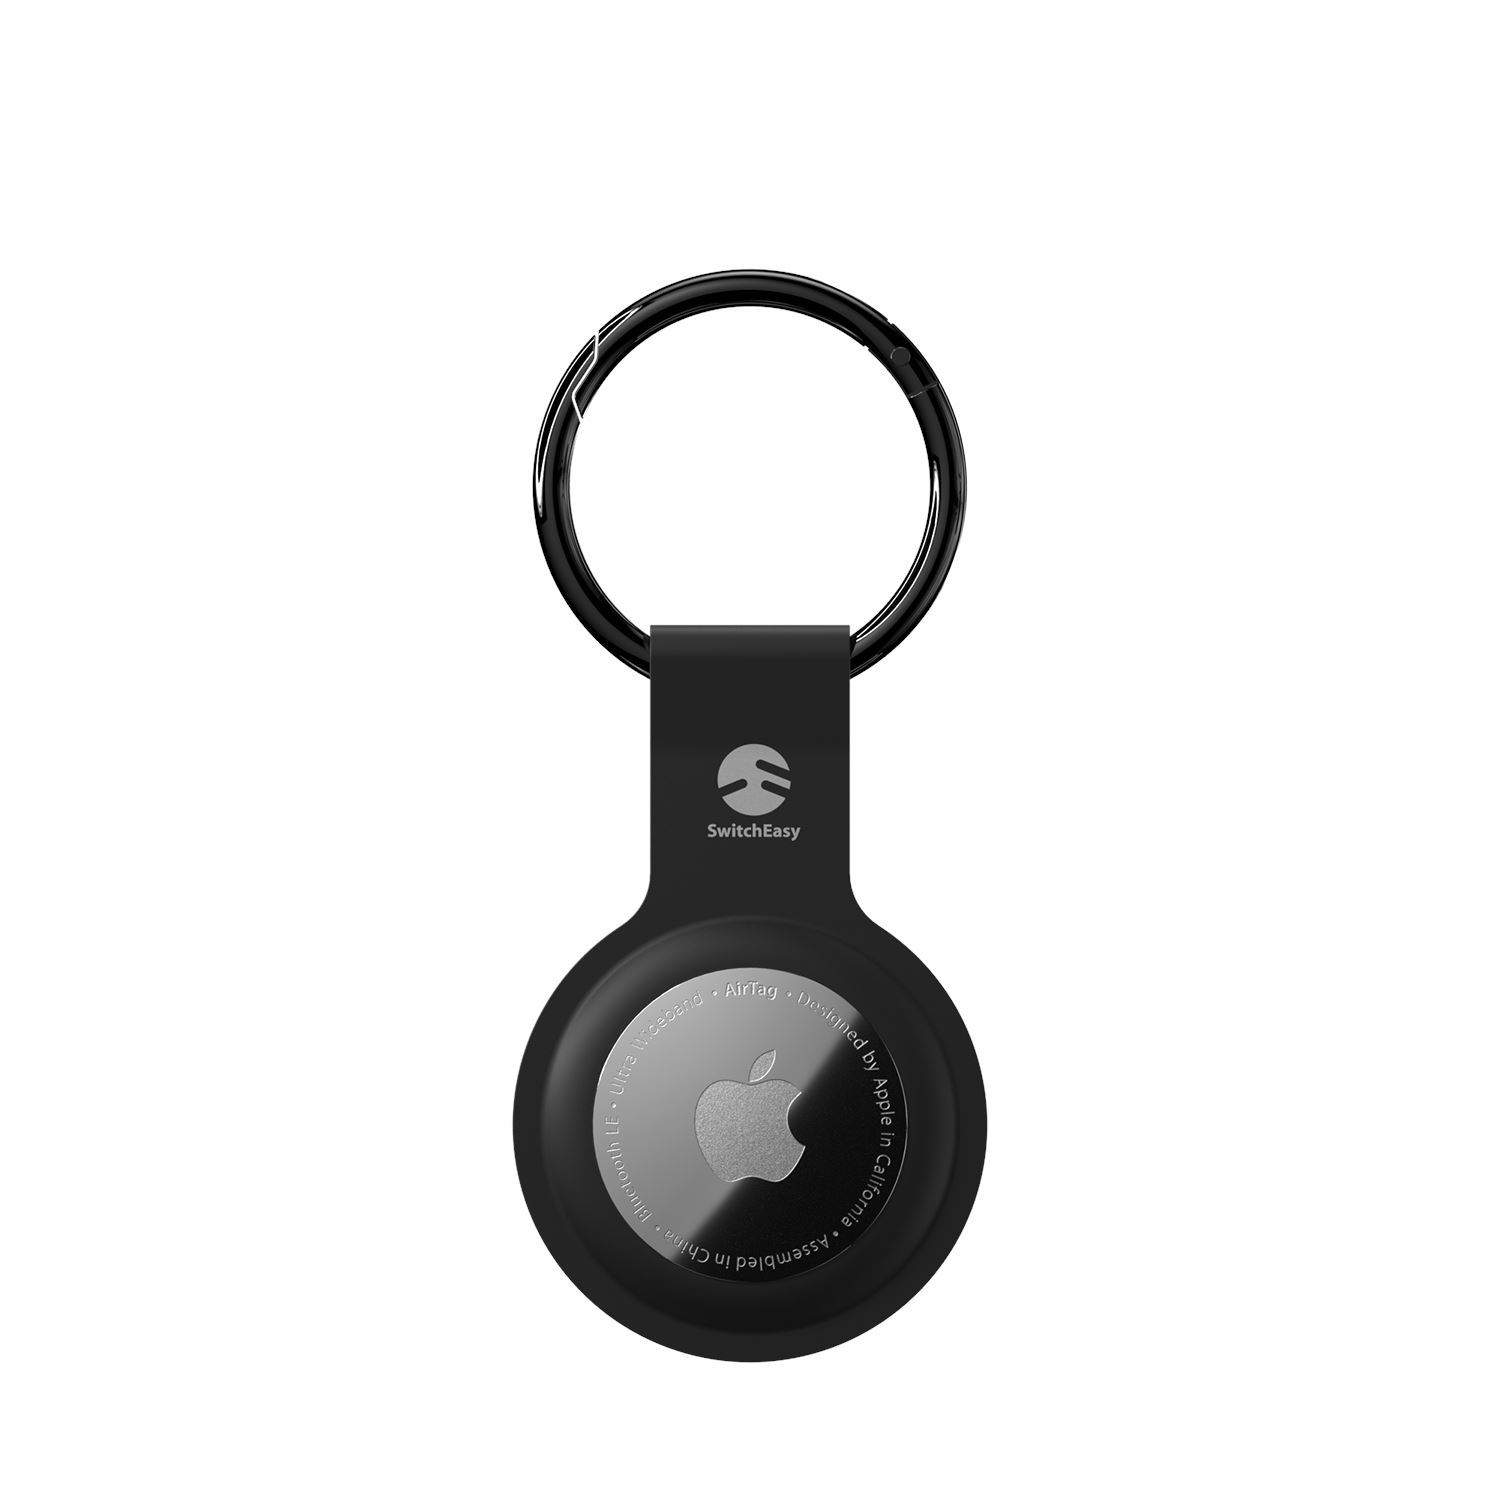 Switcheasy Skin Silicone Keyring For AirTag, Black Default Switcheasy Default 